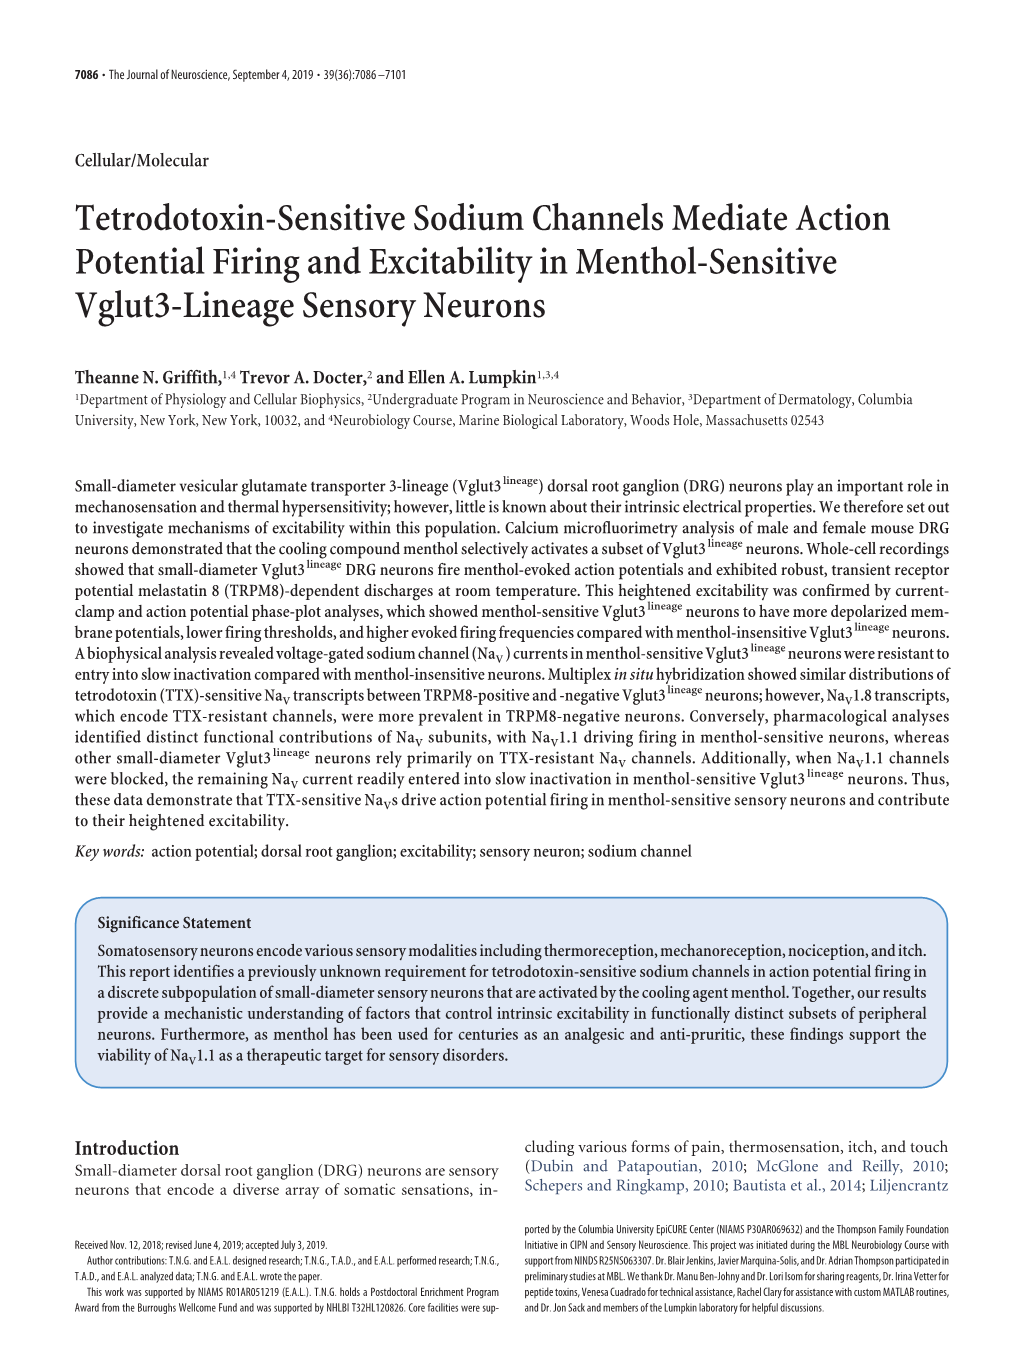 Tetrodotoxin-Sensitive Sodium Channels Mediate Action Potential Firing and Excitability in Menthol-Sensitive Vglut3-Lineage Sensory Neurons